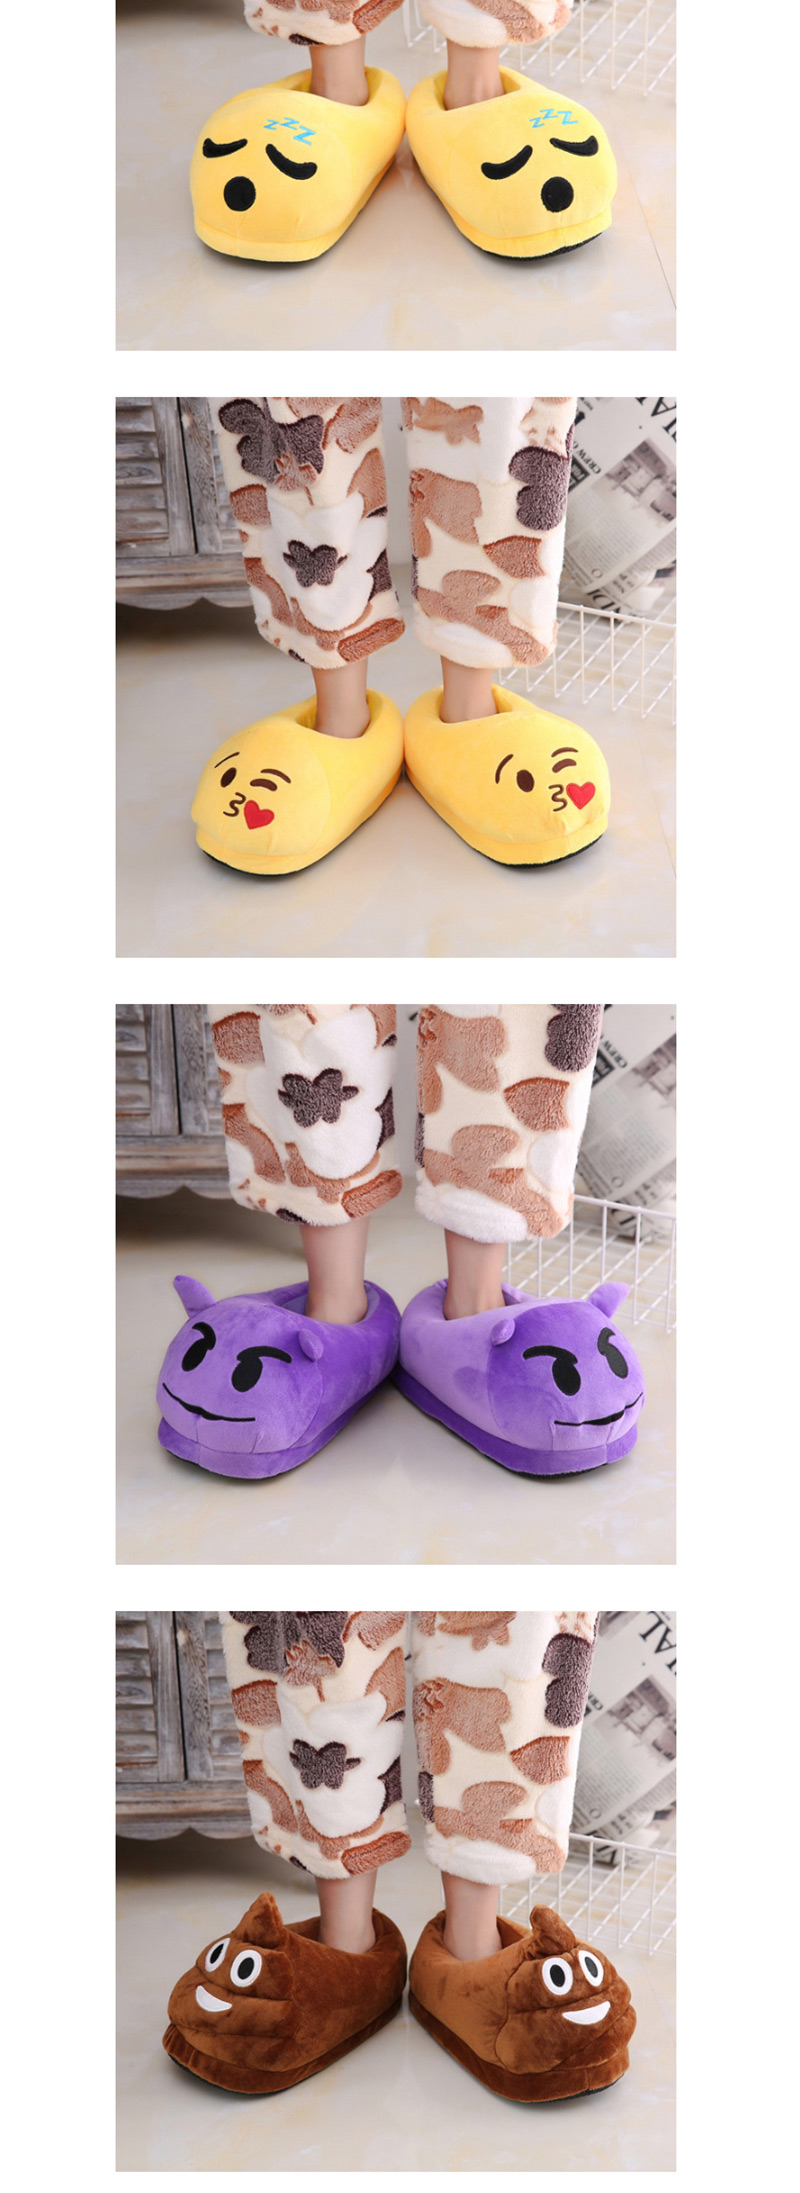 Fashion 10 Yellow Grin Cartoon Expression Plush Bag With Cotton Slippers,Slippers